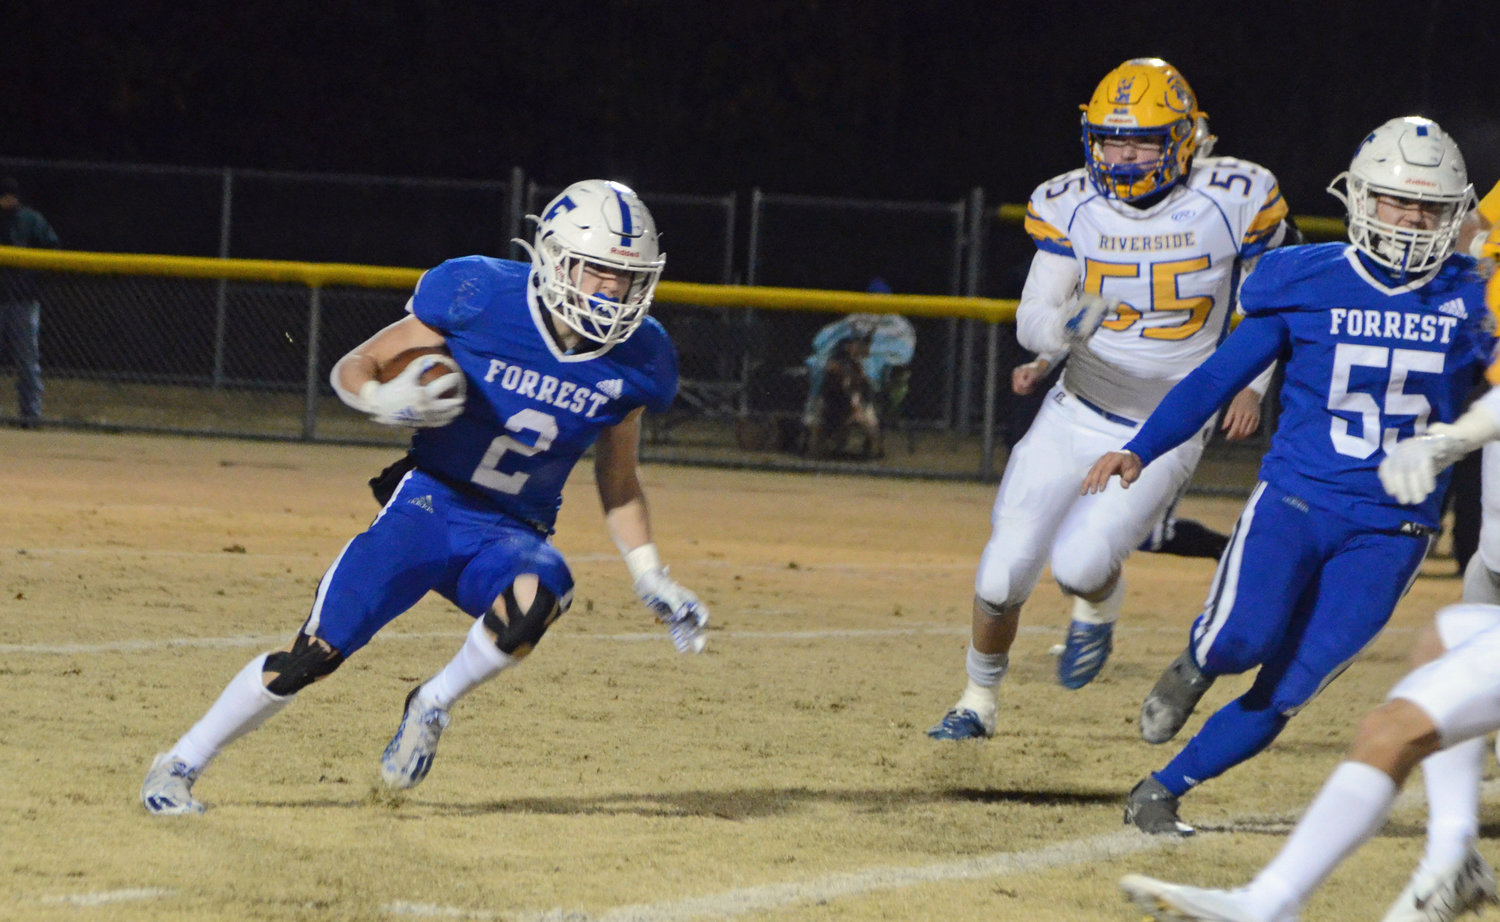 Tayton Swift (2) led the Rockets with 14 carries for 52 yards and their lone touchdown of the game in Forrest’s 15-10 quarterfinal loss to Decatur County Riverside at Chapel Hill Friday night.